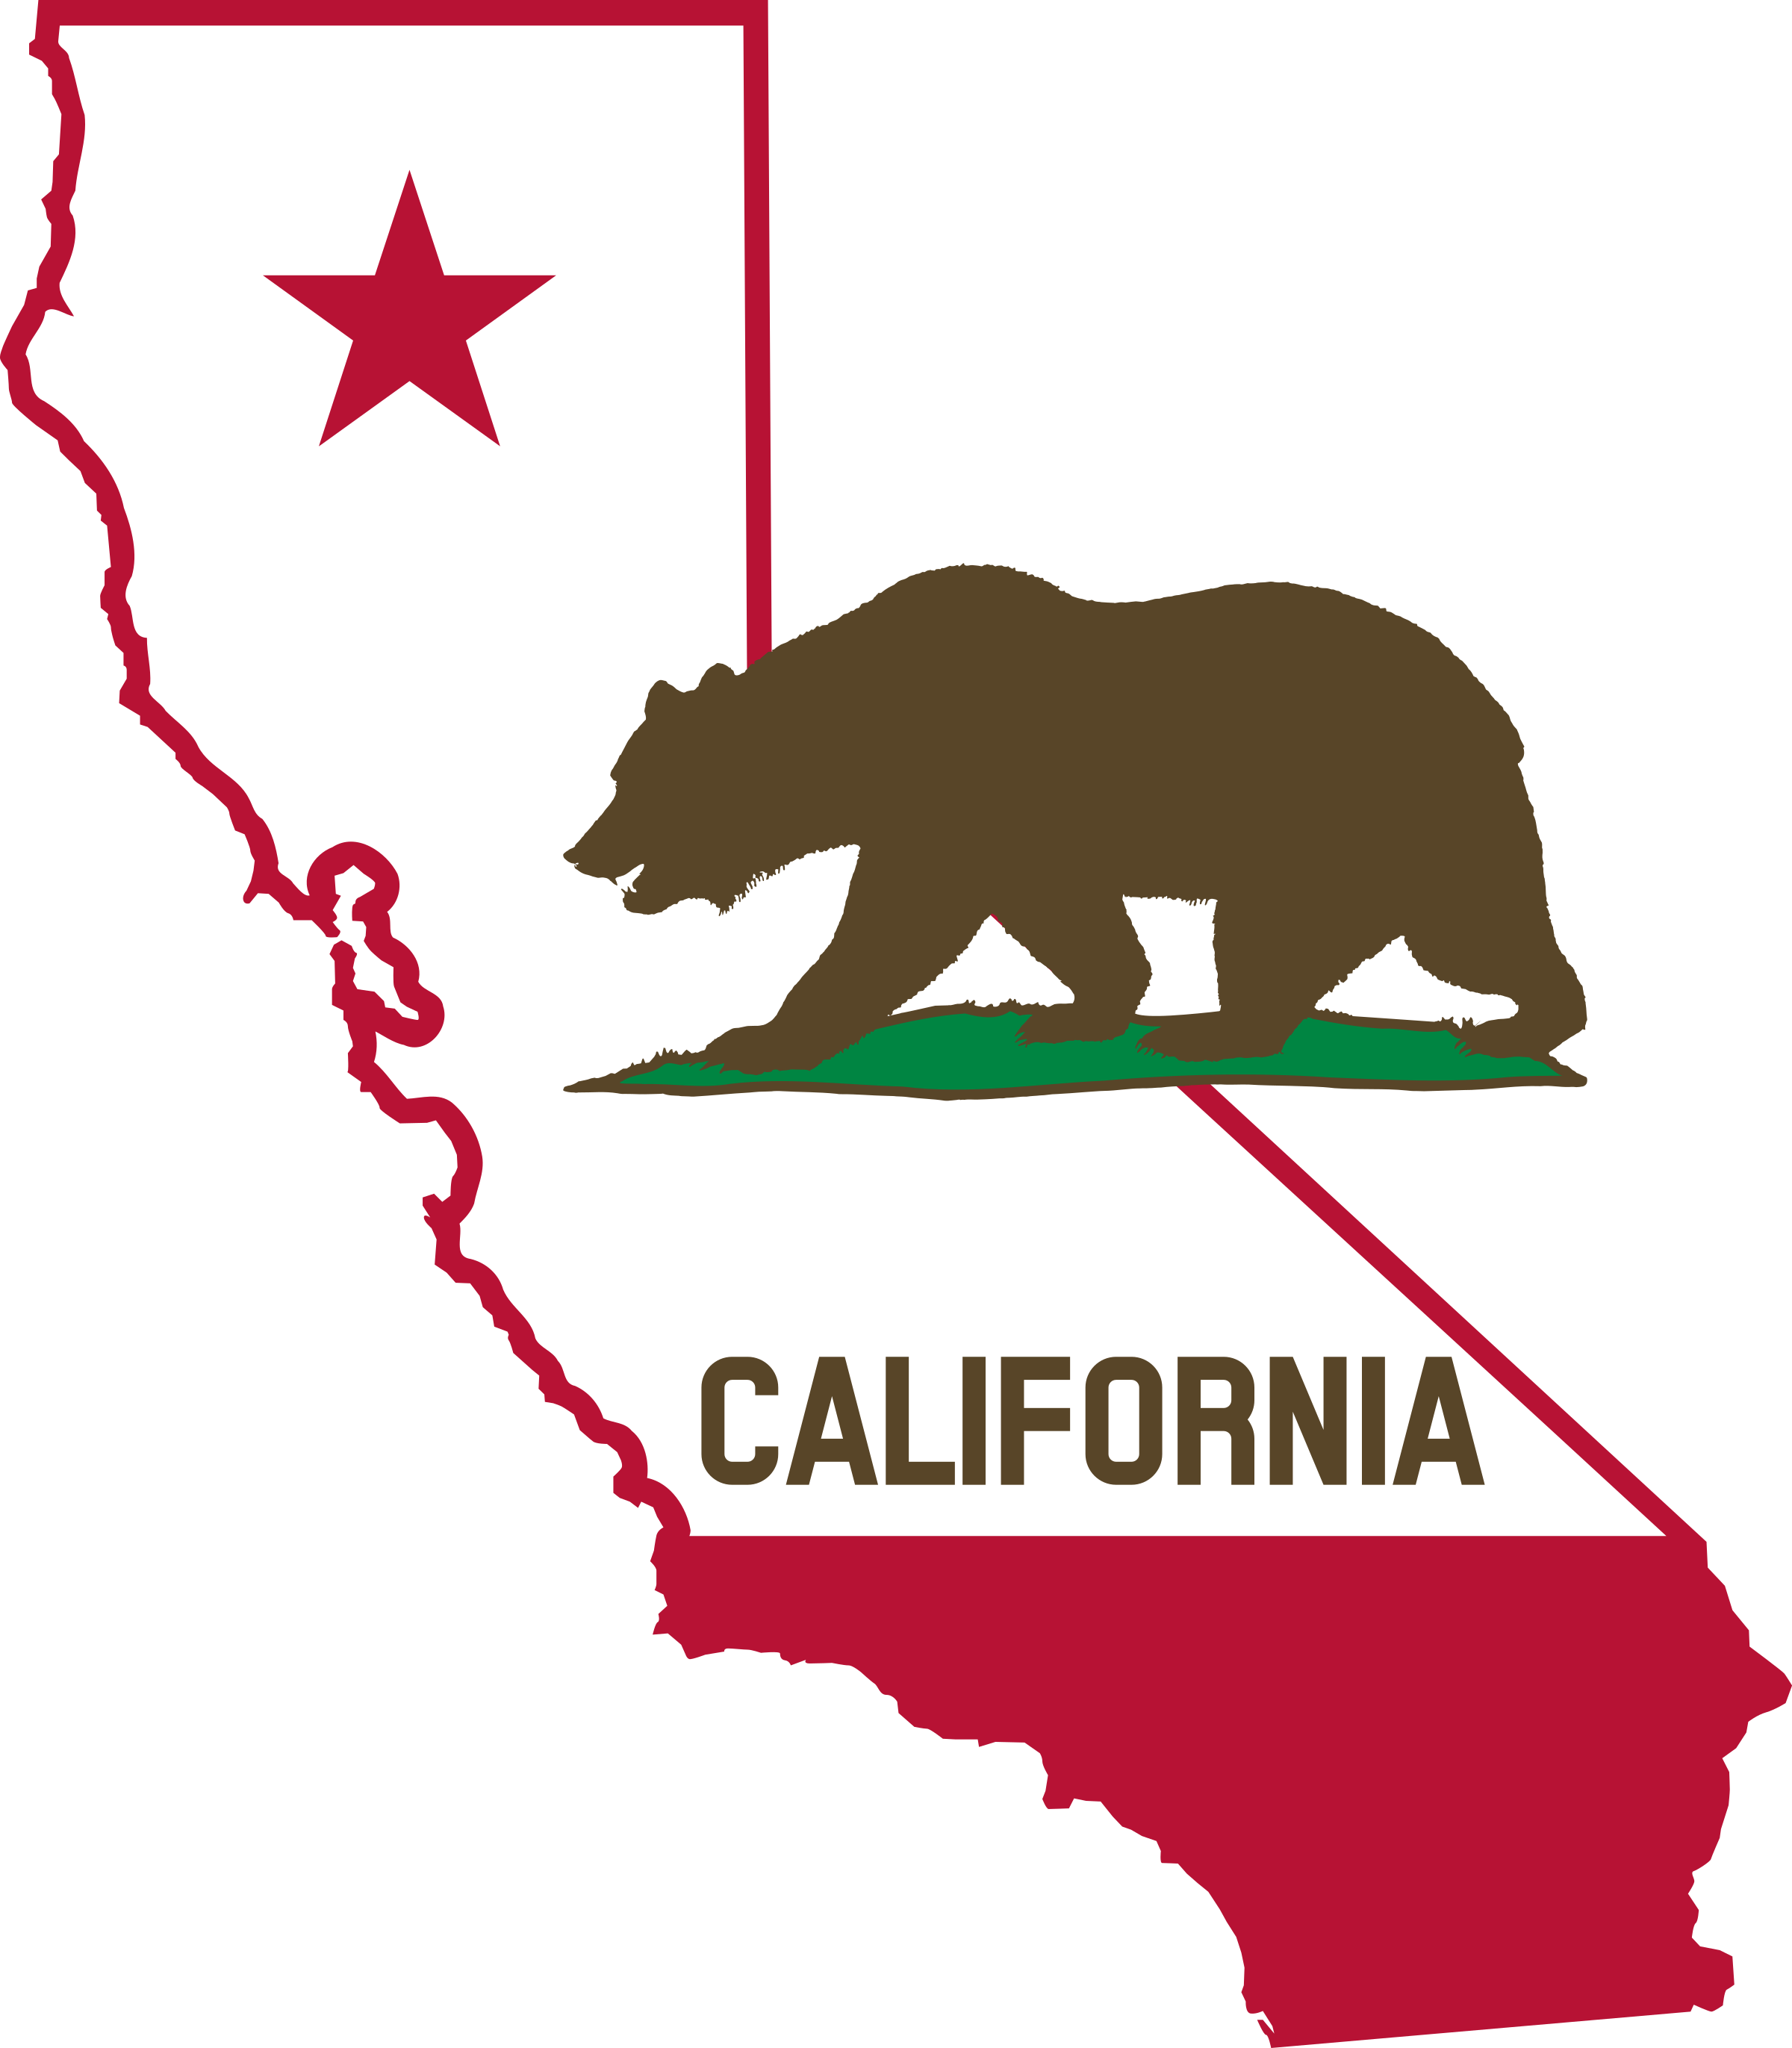 Free California Map Cliparts, Download Free Clip Art, Free.